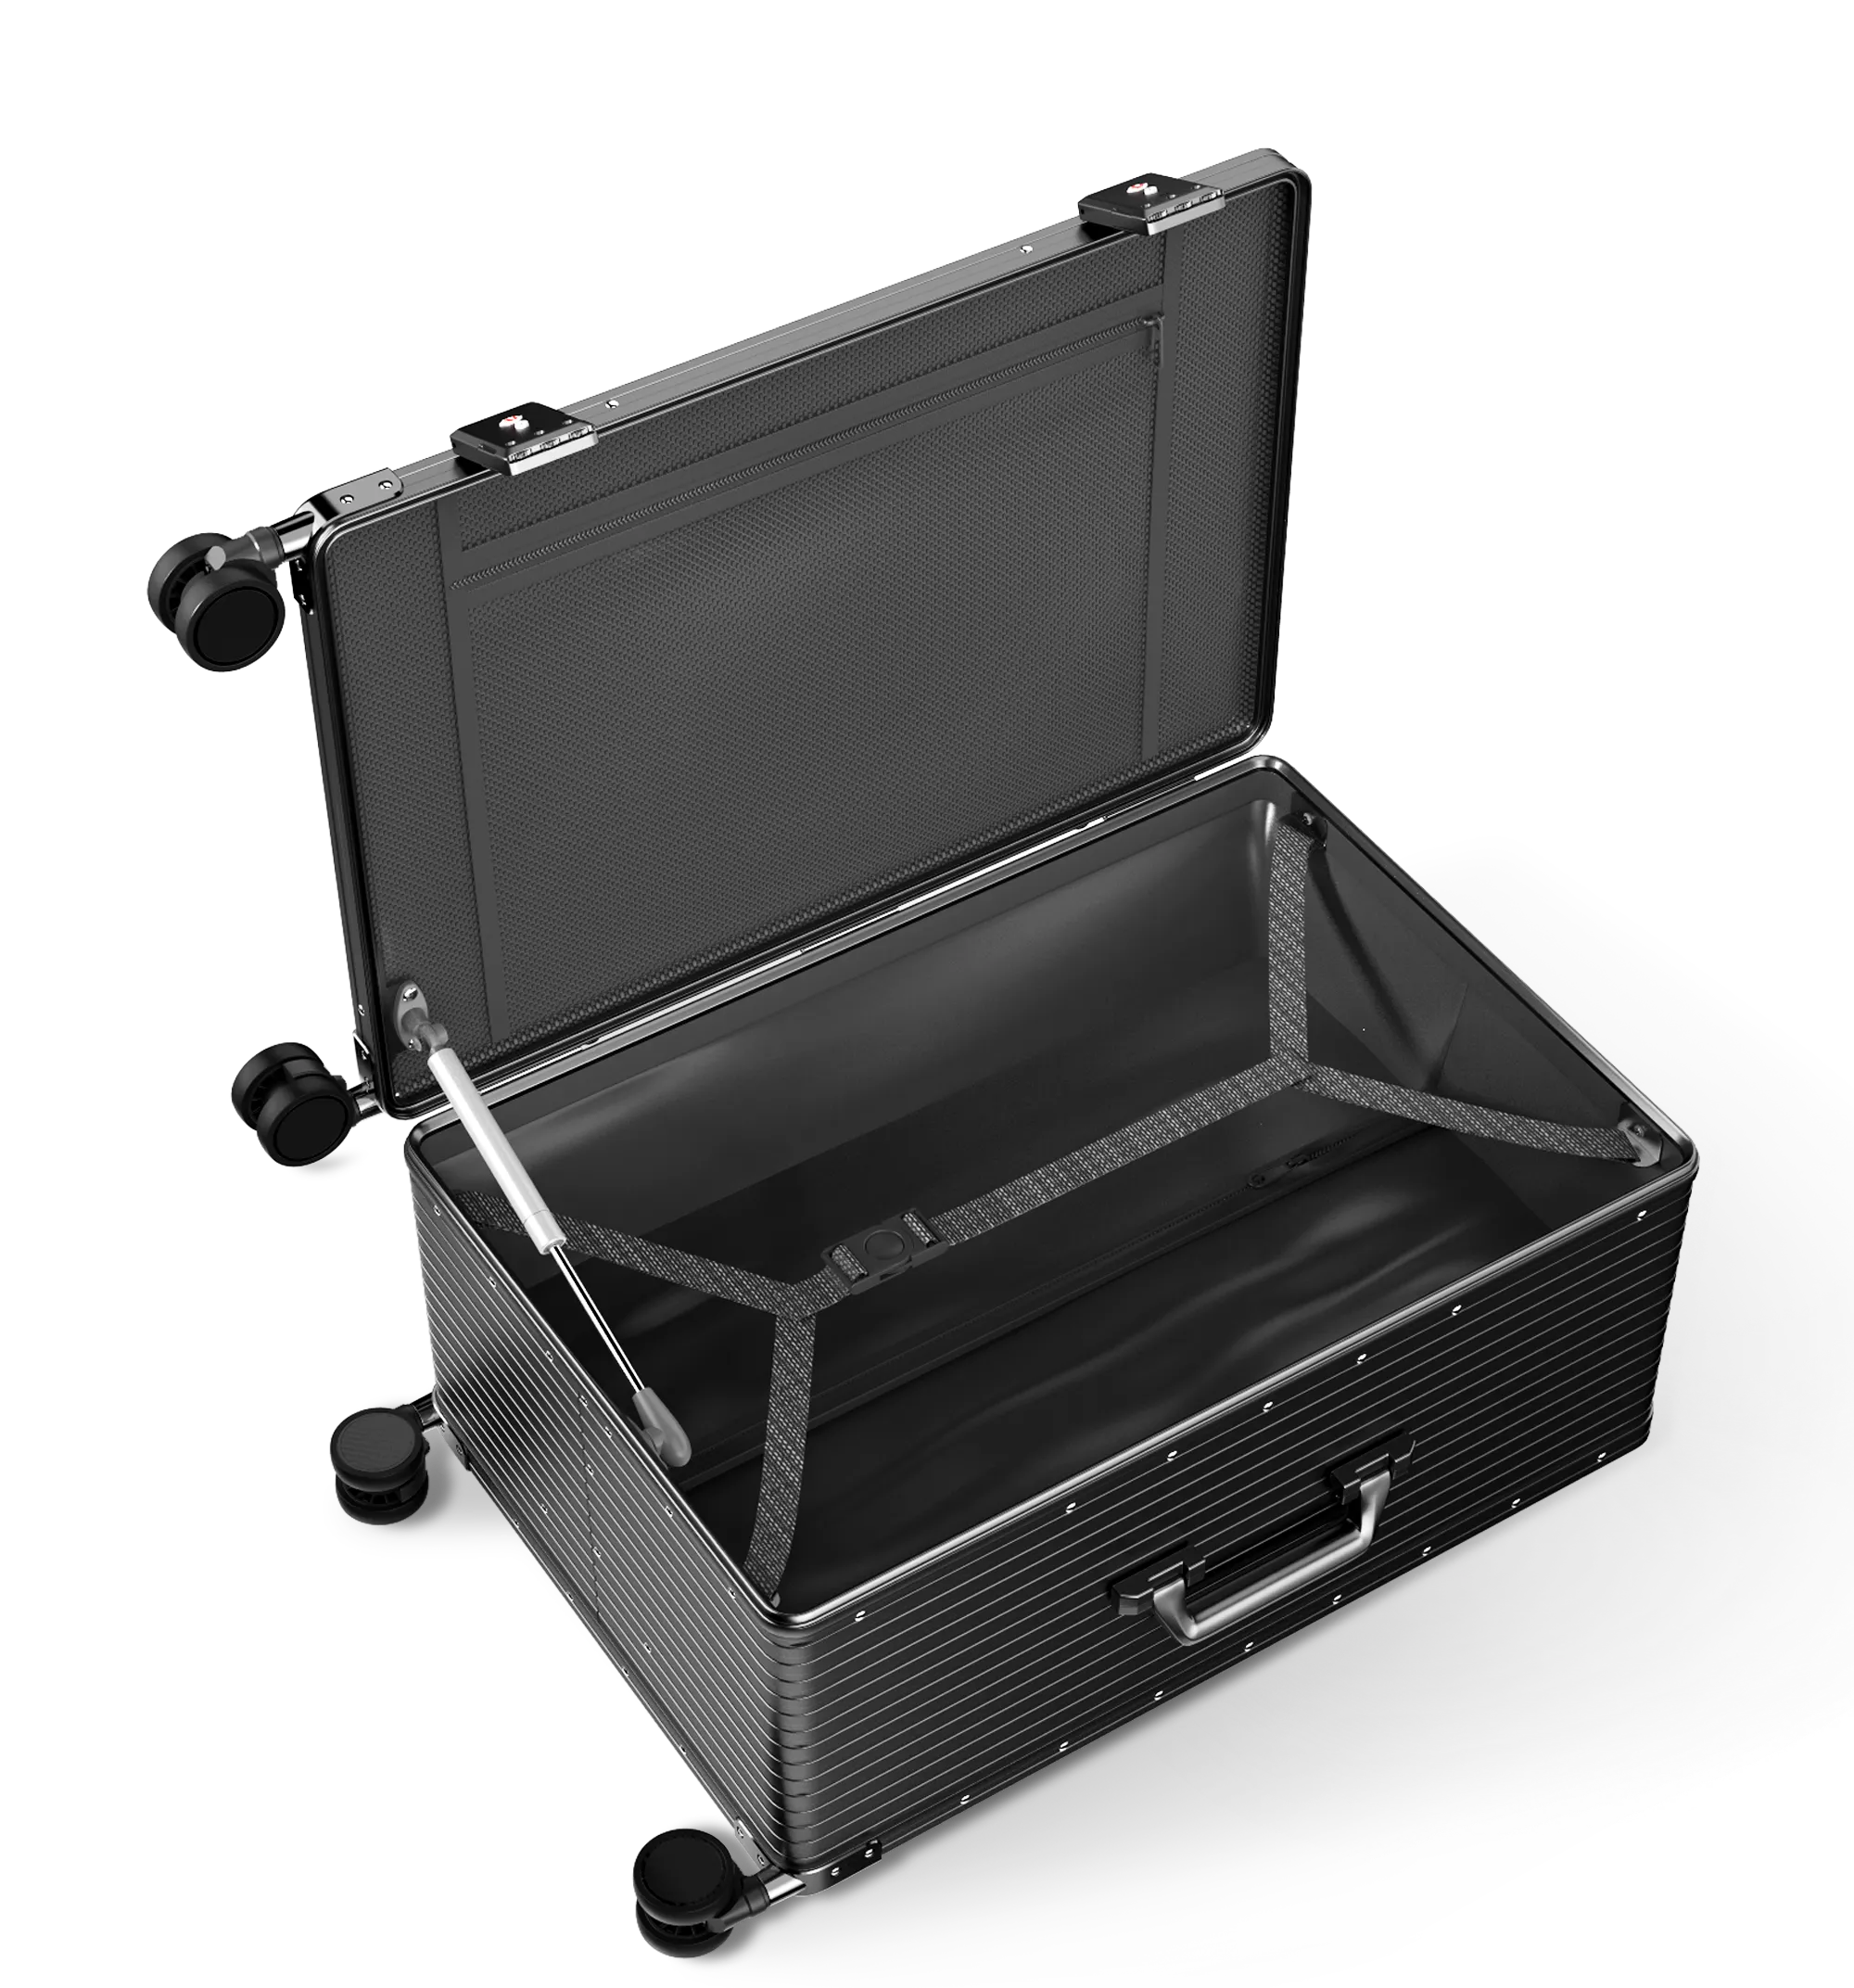 Open Plus Hexter aluminium luggage revealing interior straps and storage, with focus on spacious design and secure compartments for Singapore travel.